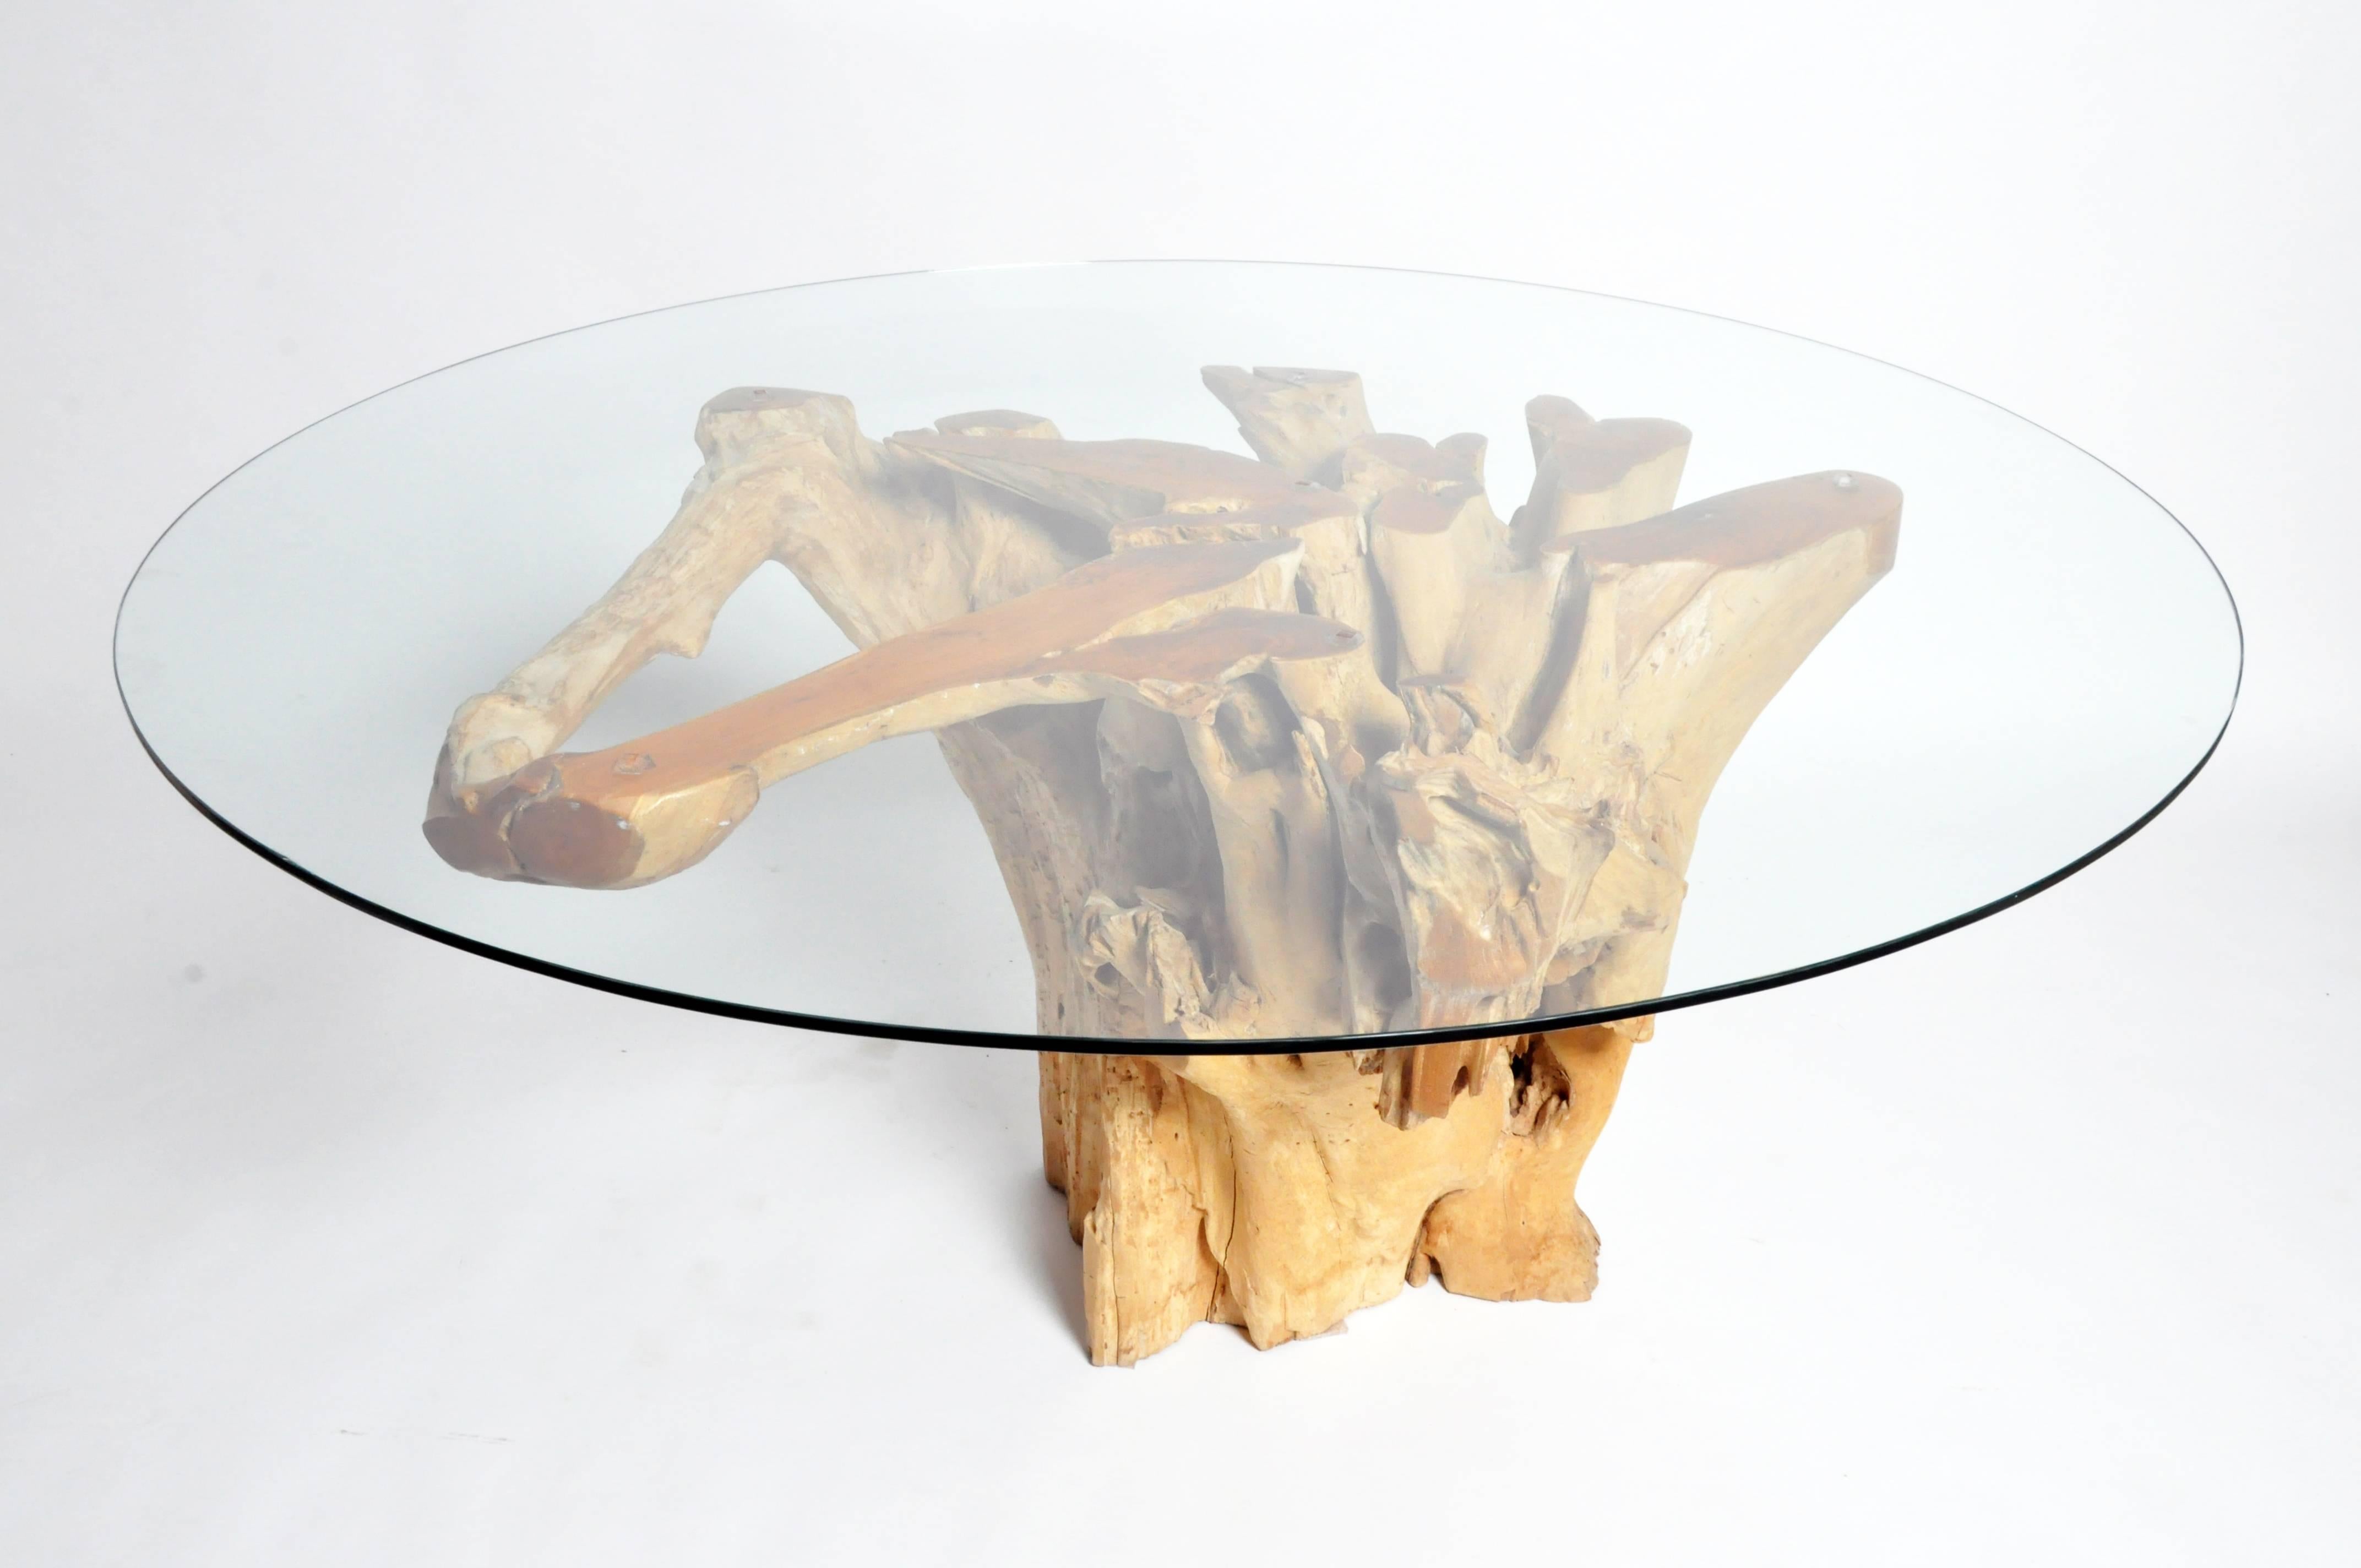 This pedestal was cut from a old teak stump and root. The tabletop is cut from the root and bottom was the stump of the tree. The tree was harvested in the early 20th century and the stump left in the ground; it was considered of little value. Since